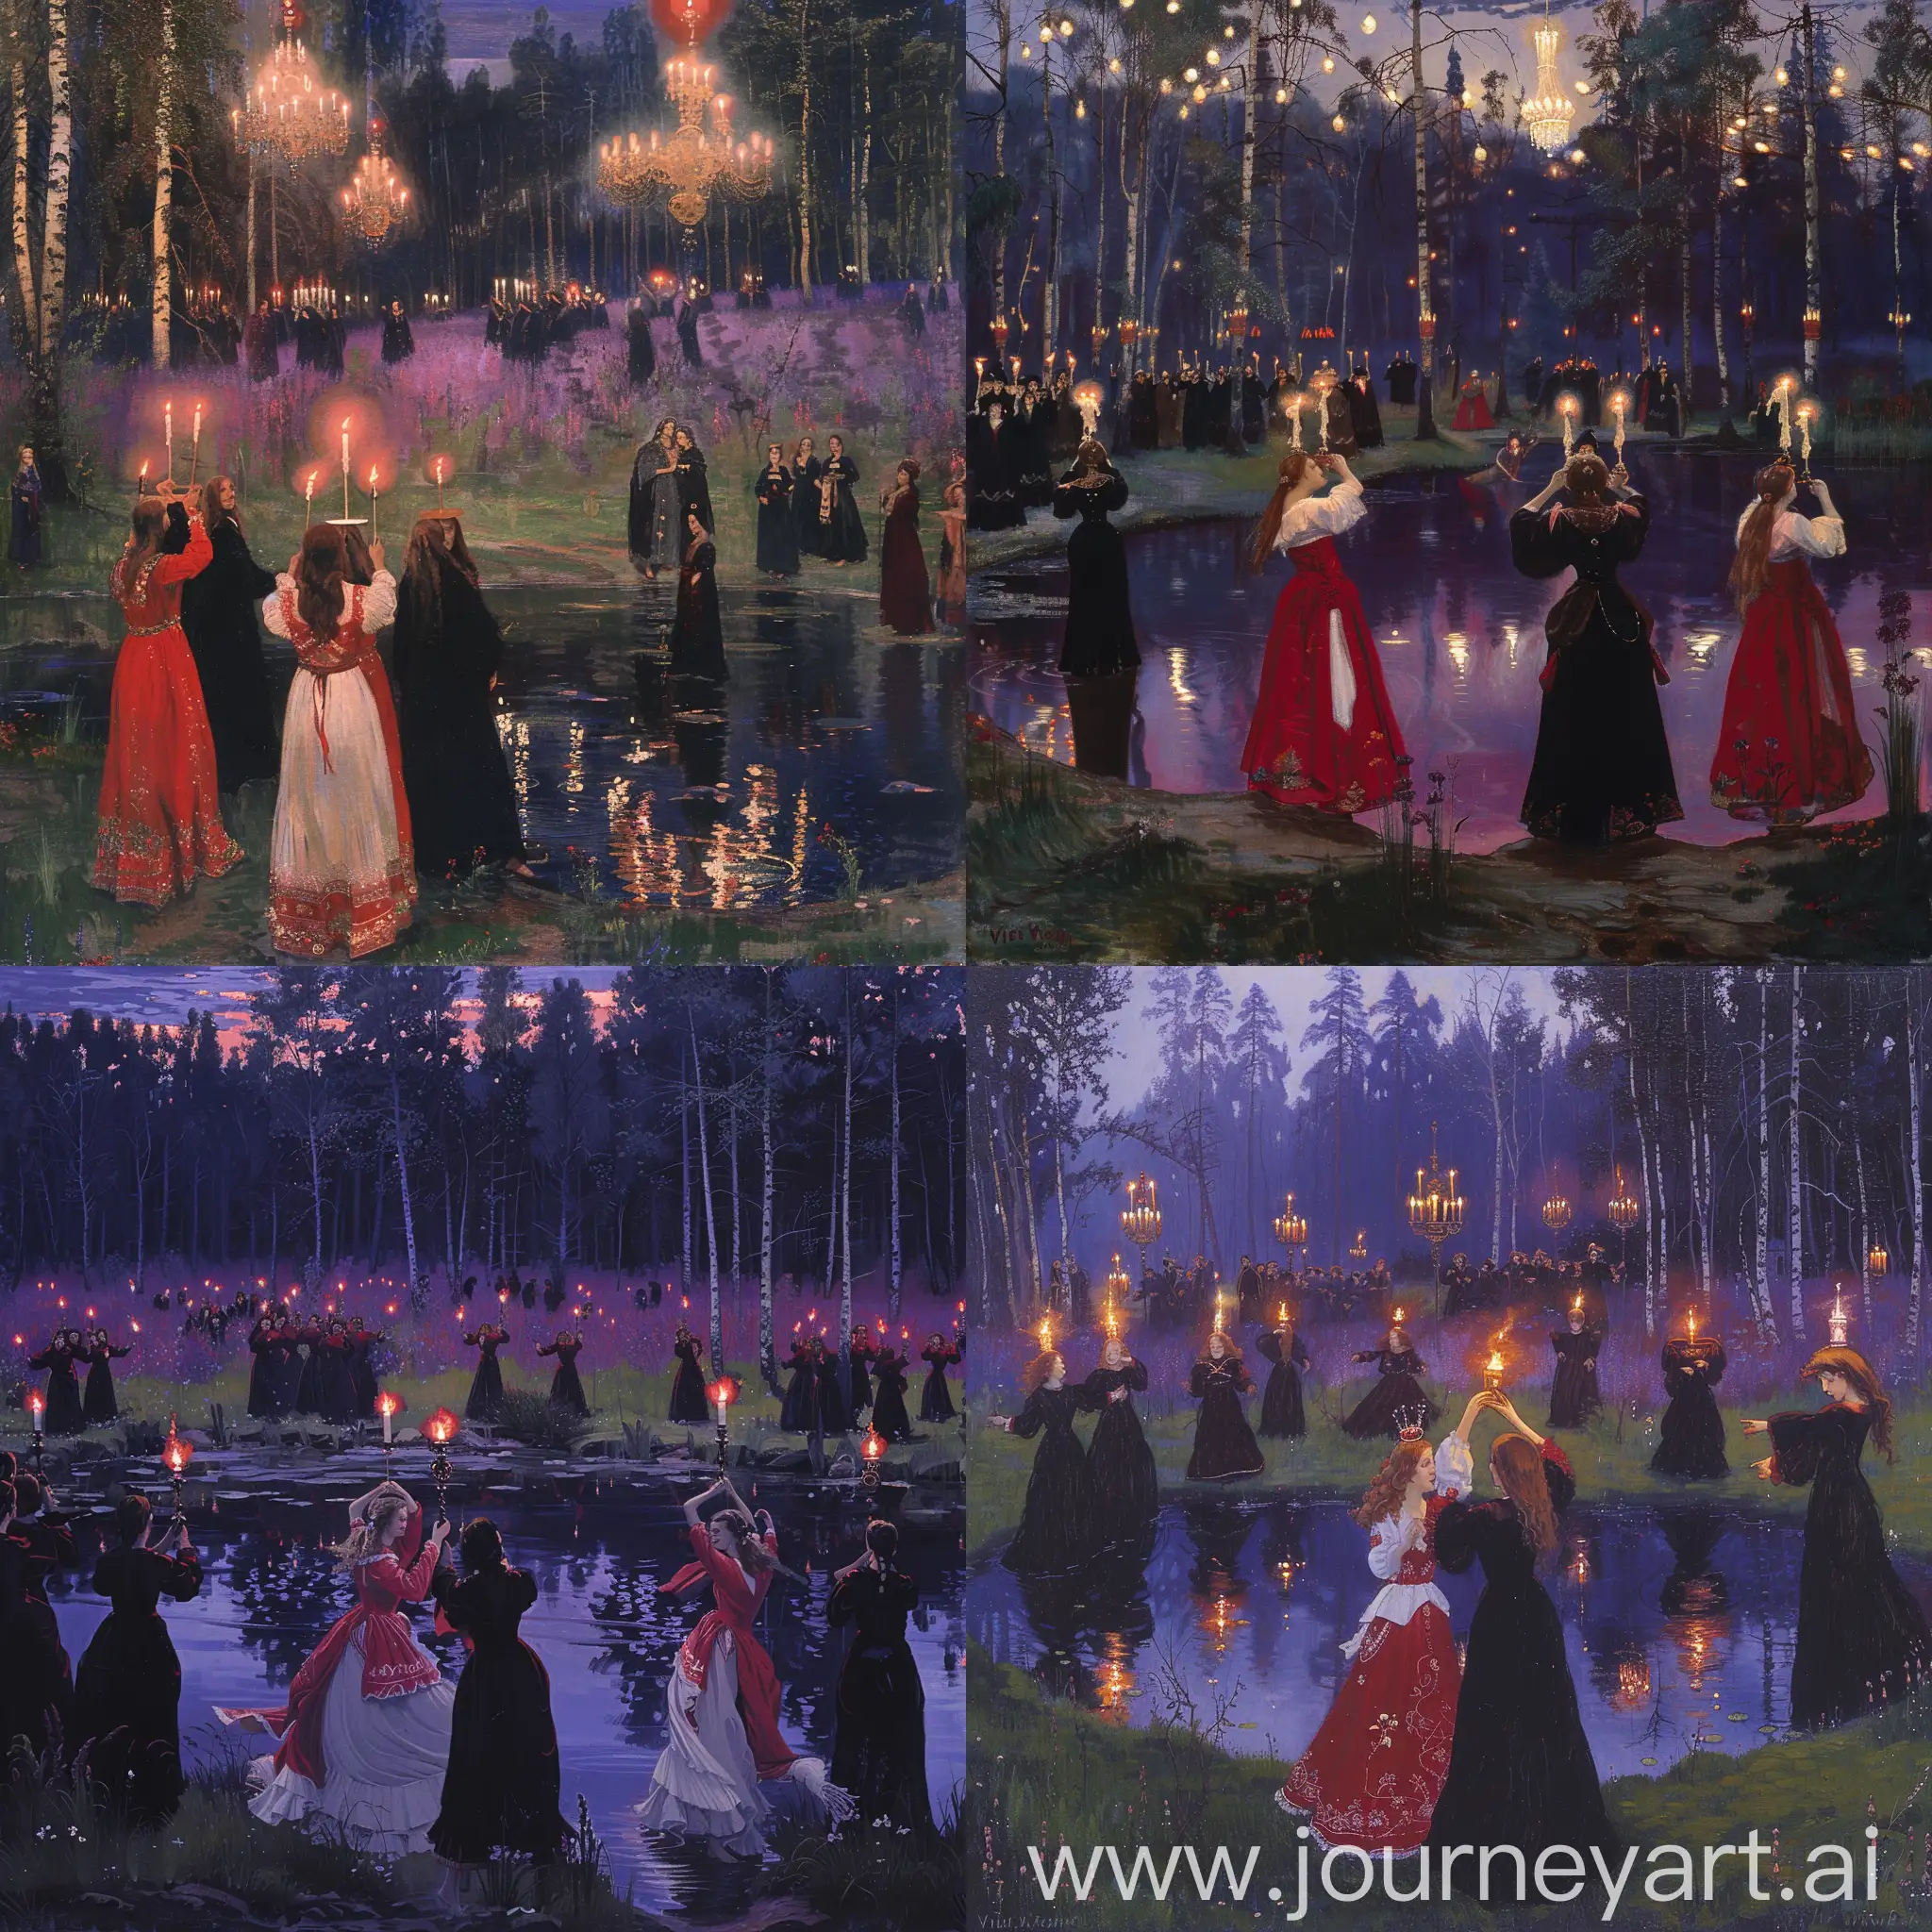 Romantic-Night-Dance-by-the-Pond-Enchanting-Girls-with-Candle-Crowns-Amidst-Meadow-and-Woods